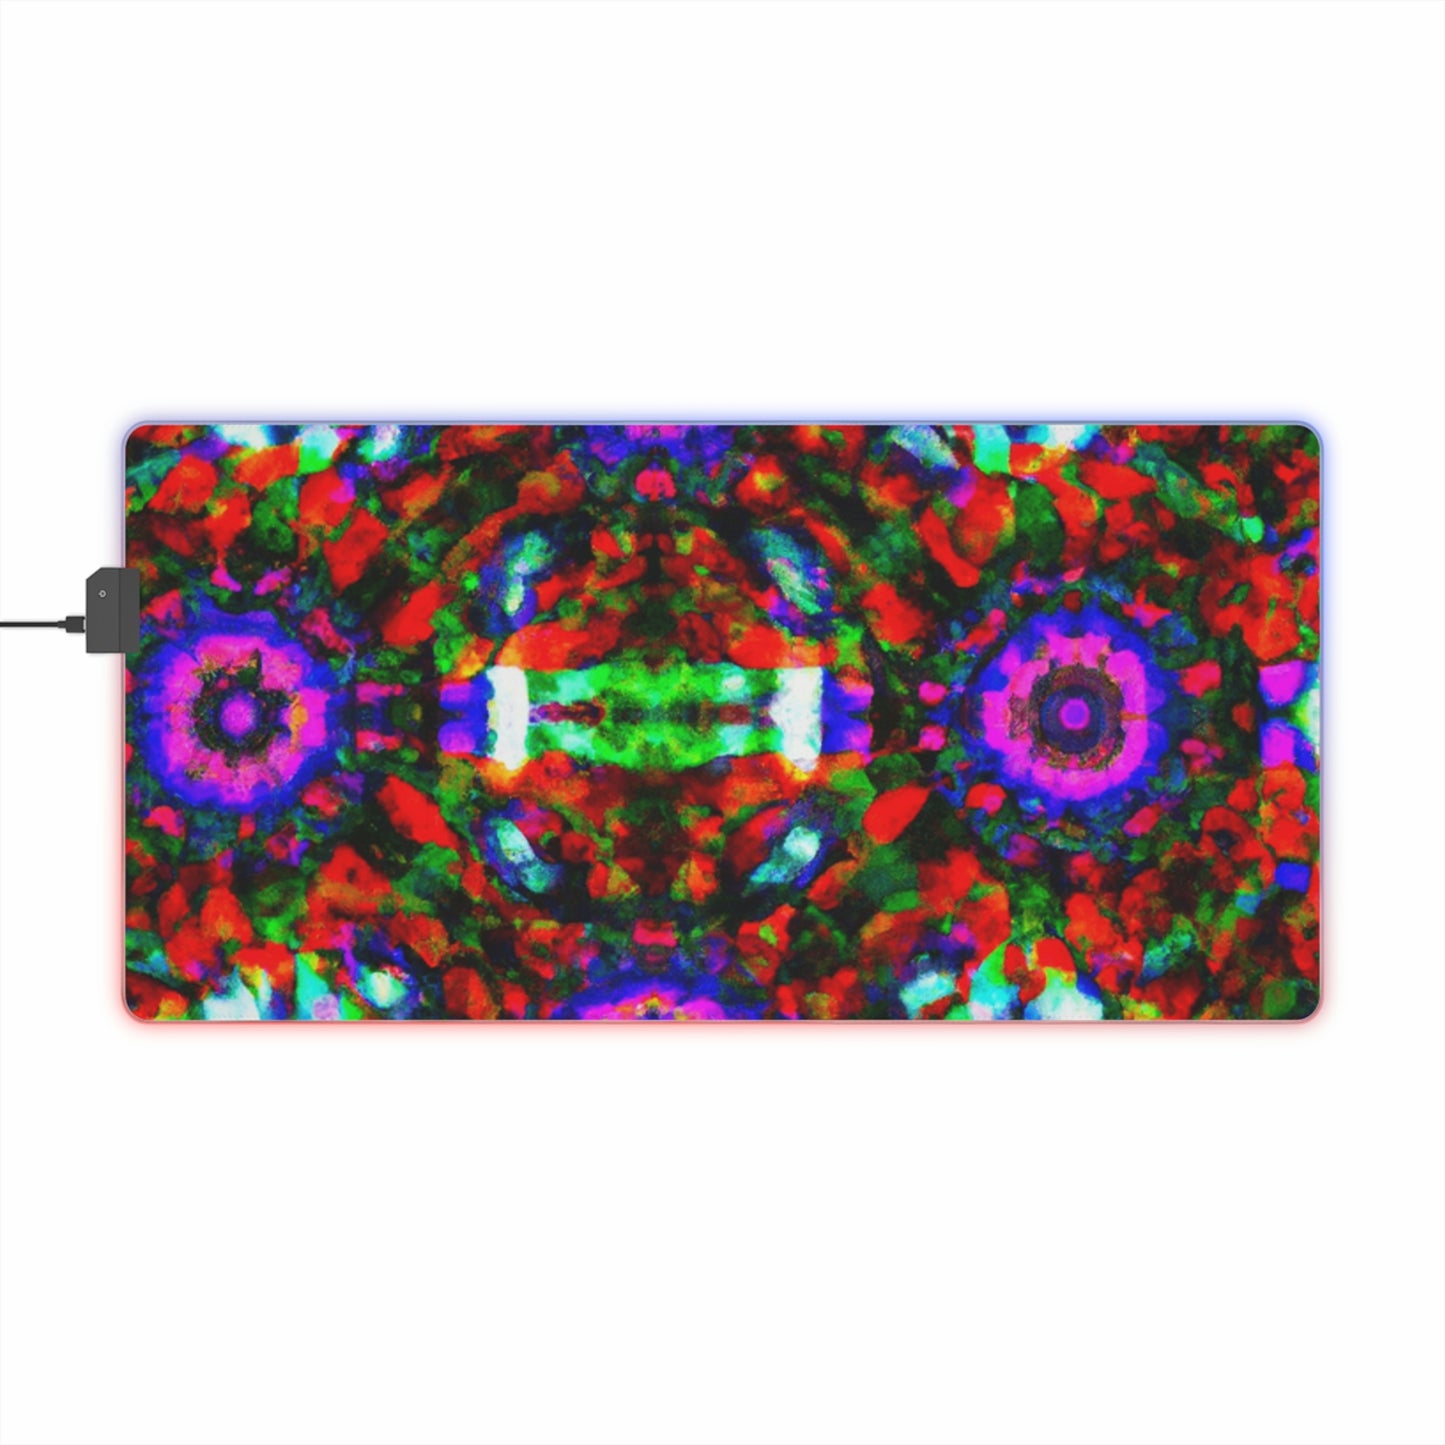 Alice the Ace-Ace Rocket Rider - Psychedelic Trippy LED Light Up Gaming Mouse Pad